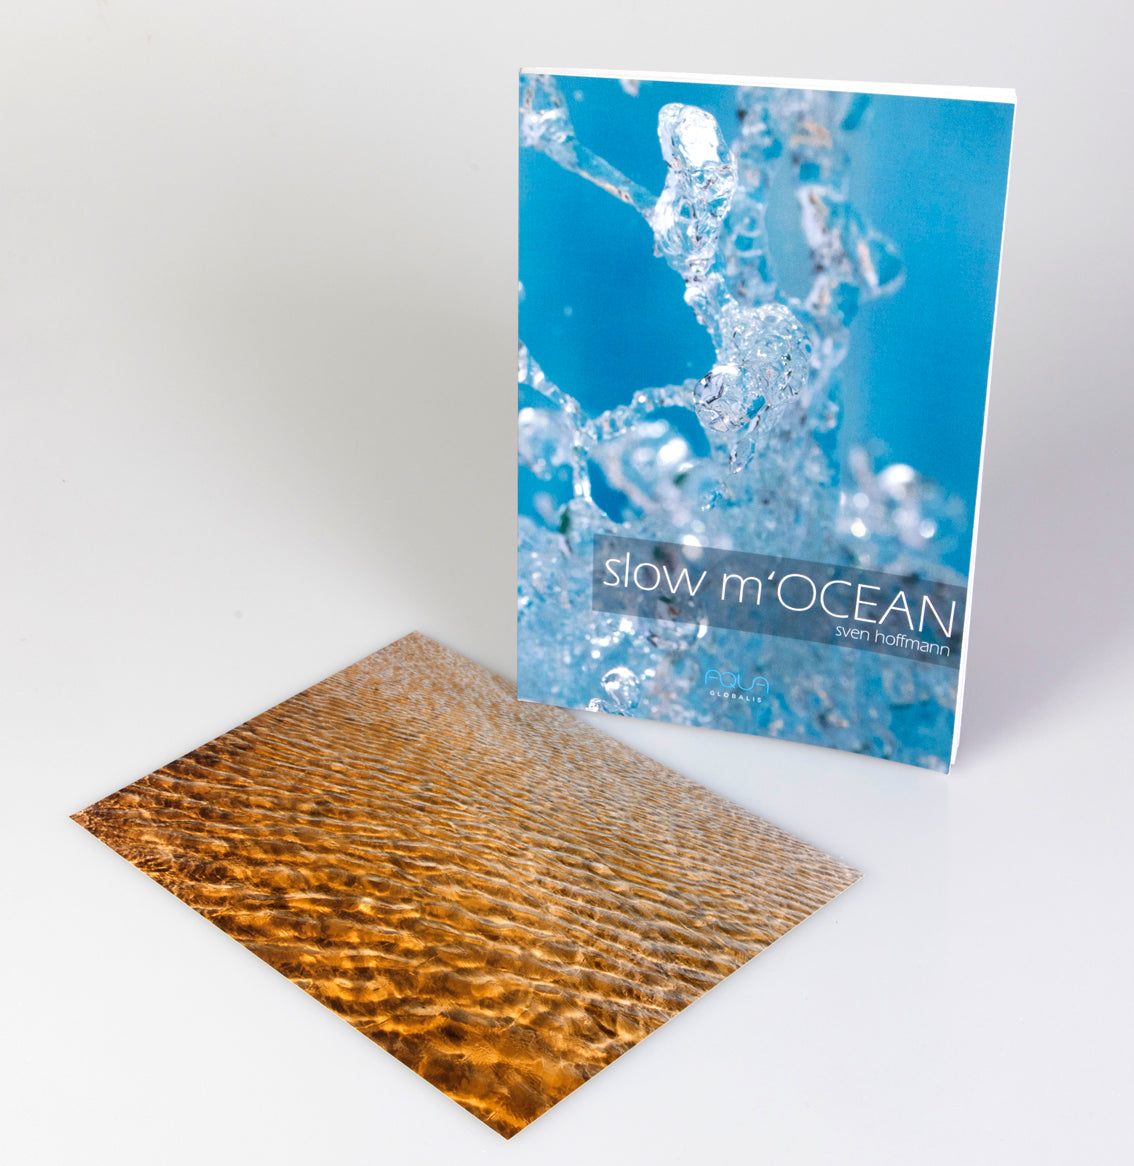 Slow m'OCEAN - Limited Edition